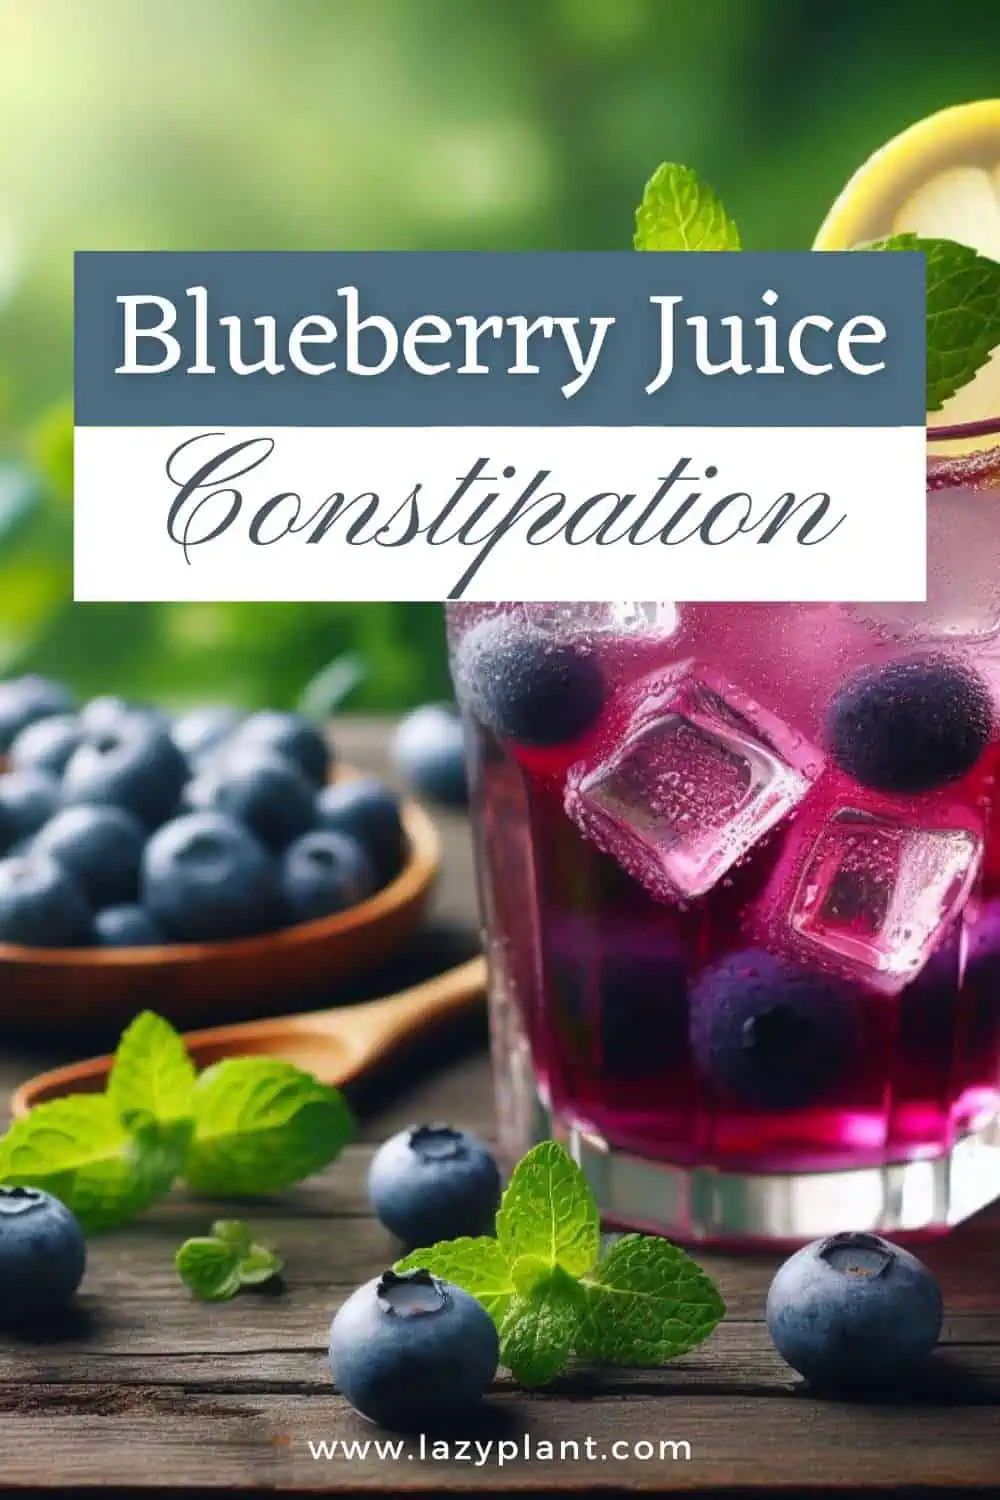 Can Blueberry juice relieve constipation?